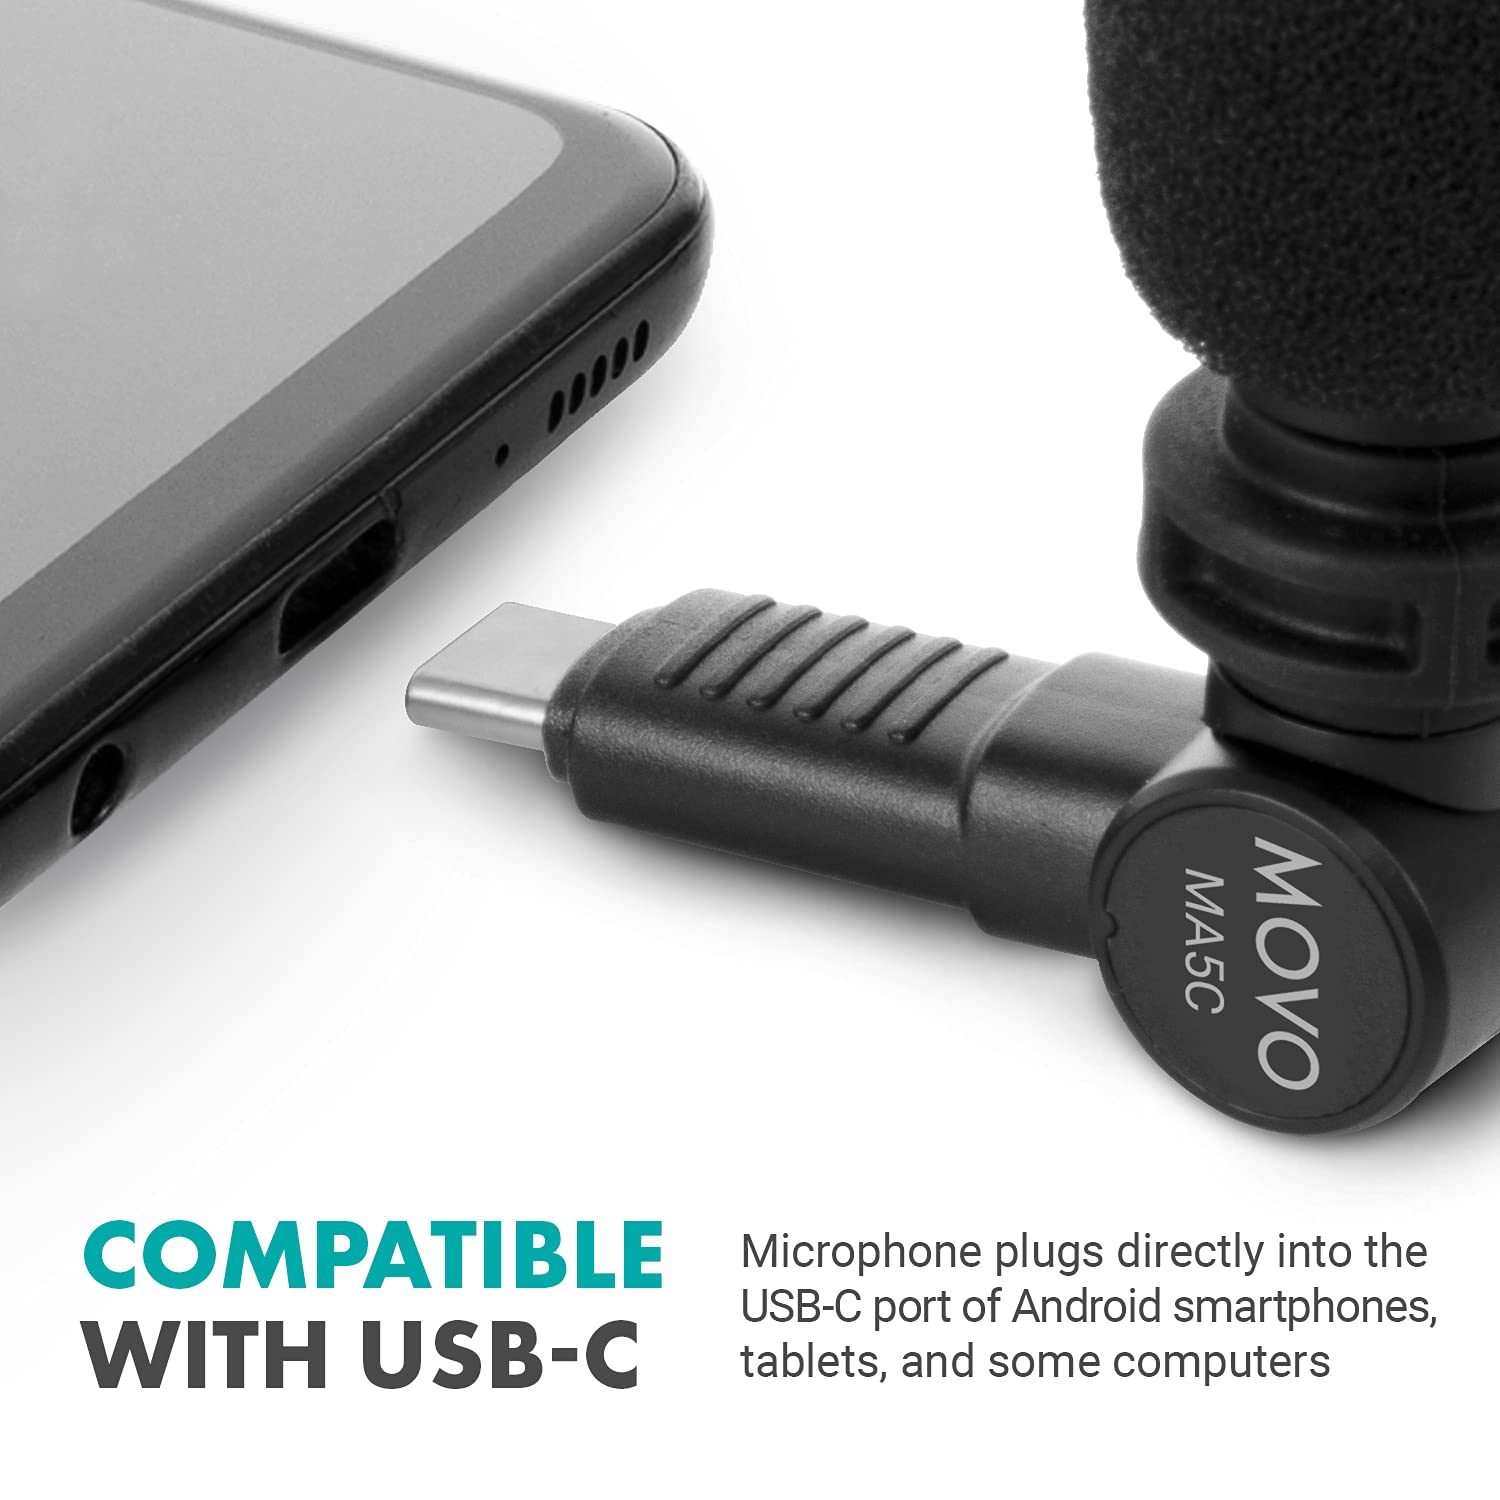 Movo MA5C External USB C Microphone for Type-C Devices - Condenser Shotgun Mic for Video Recording, Voiceover, Interview, Travel, Vlogging, Youtube  - Acceptable